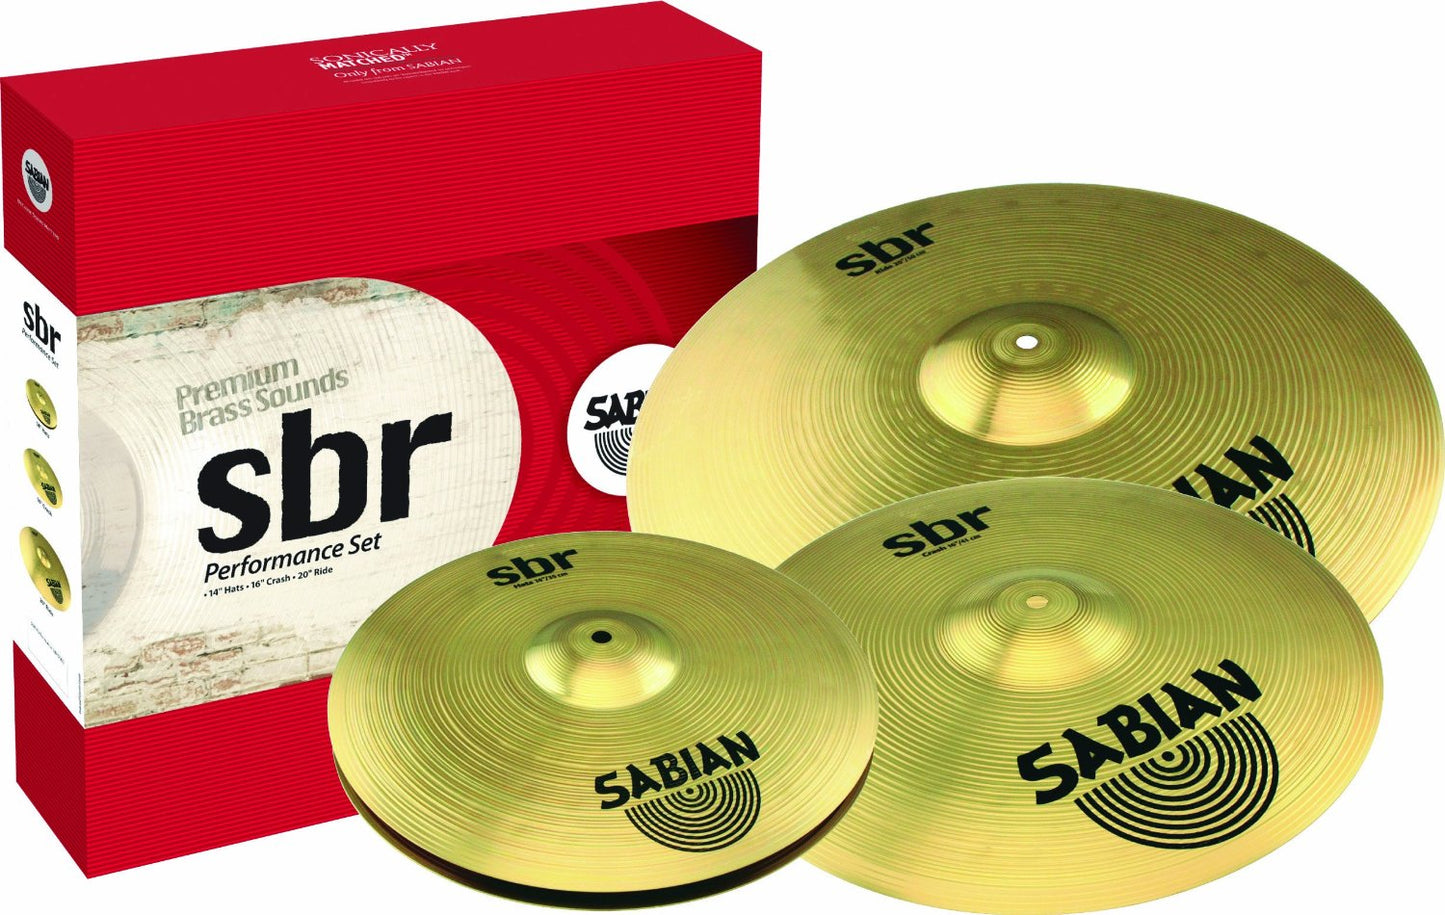 Sabian SBR Performance Pack with 14” Hat, 16” Crash, and 20” Ride Cymbals